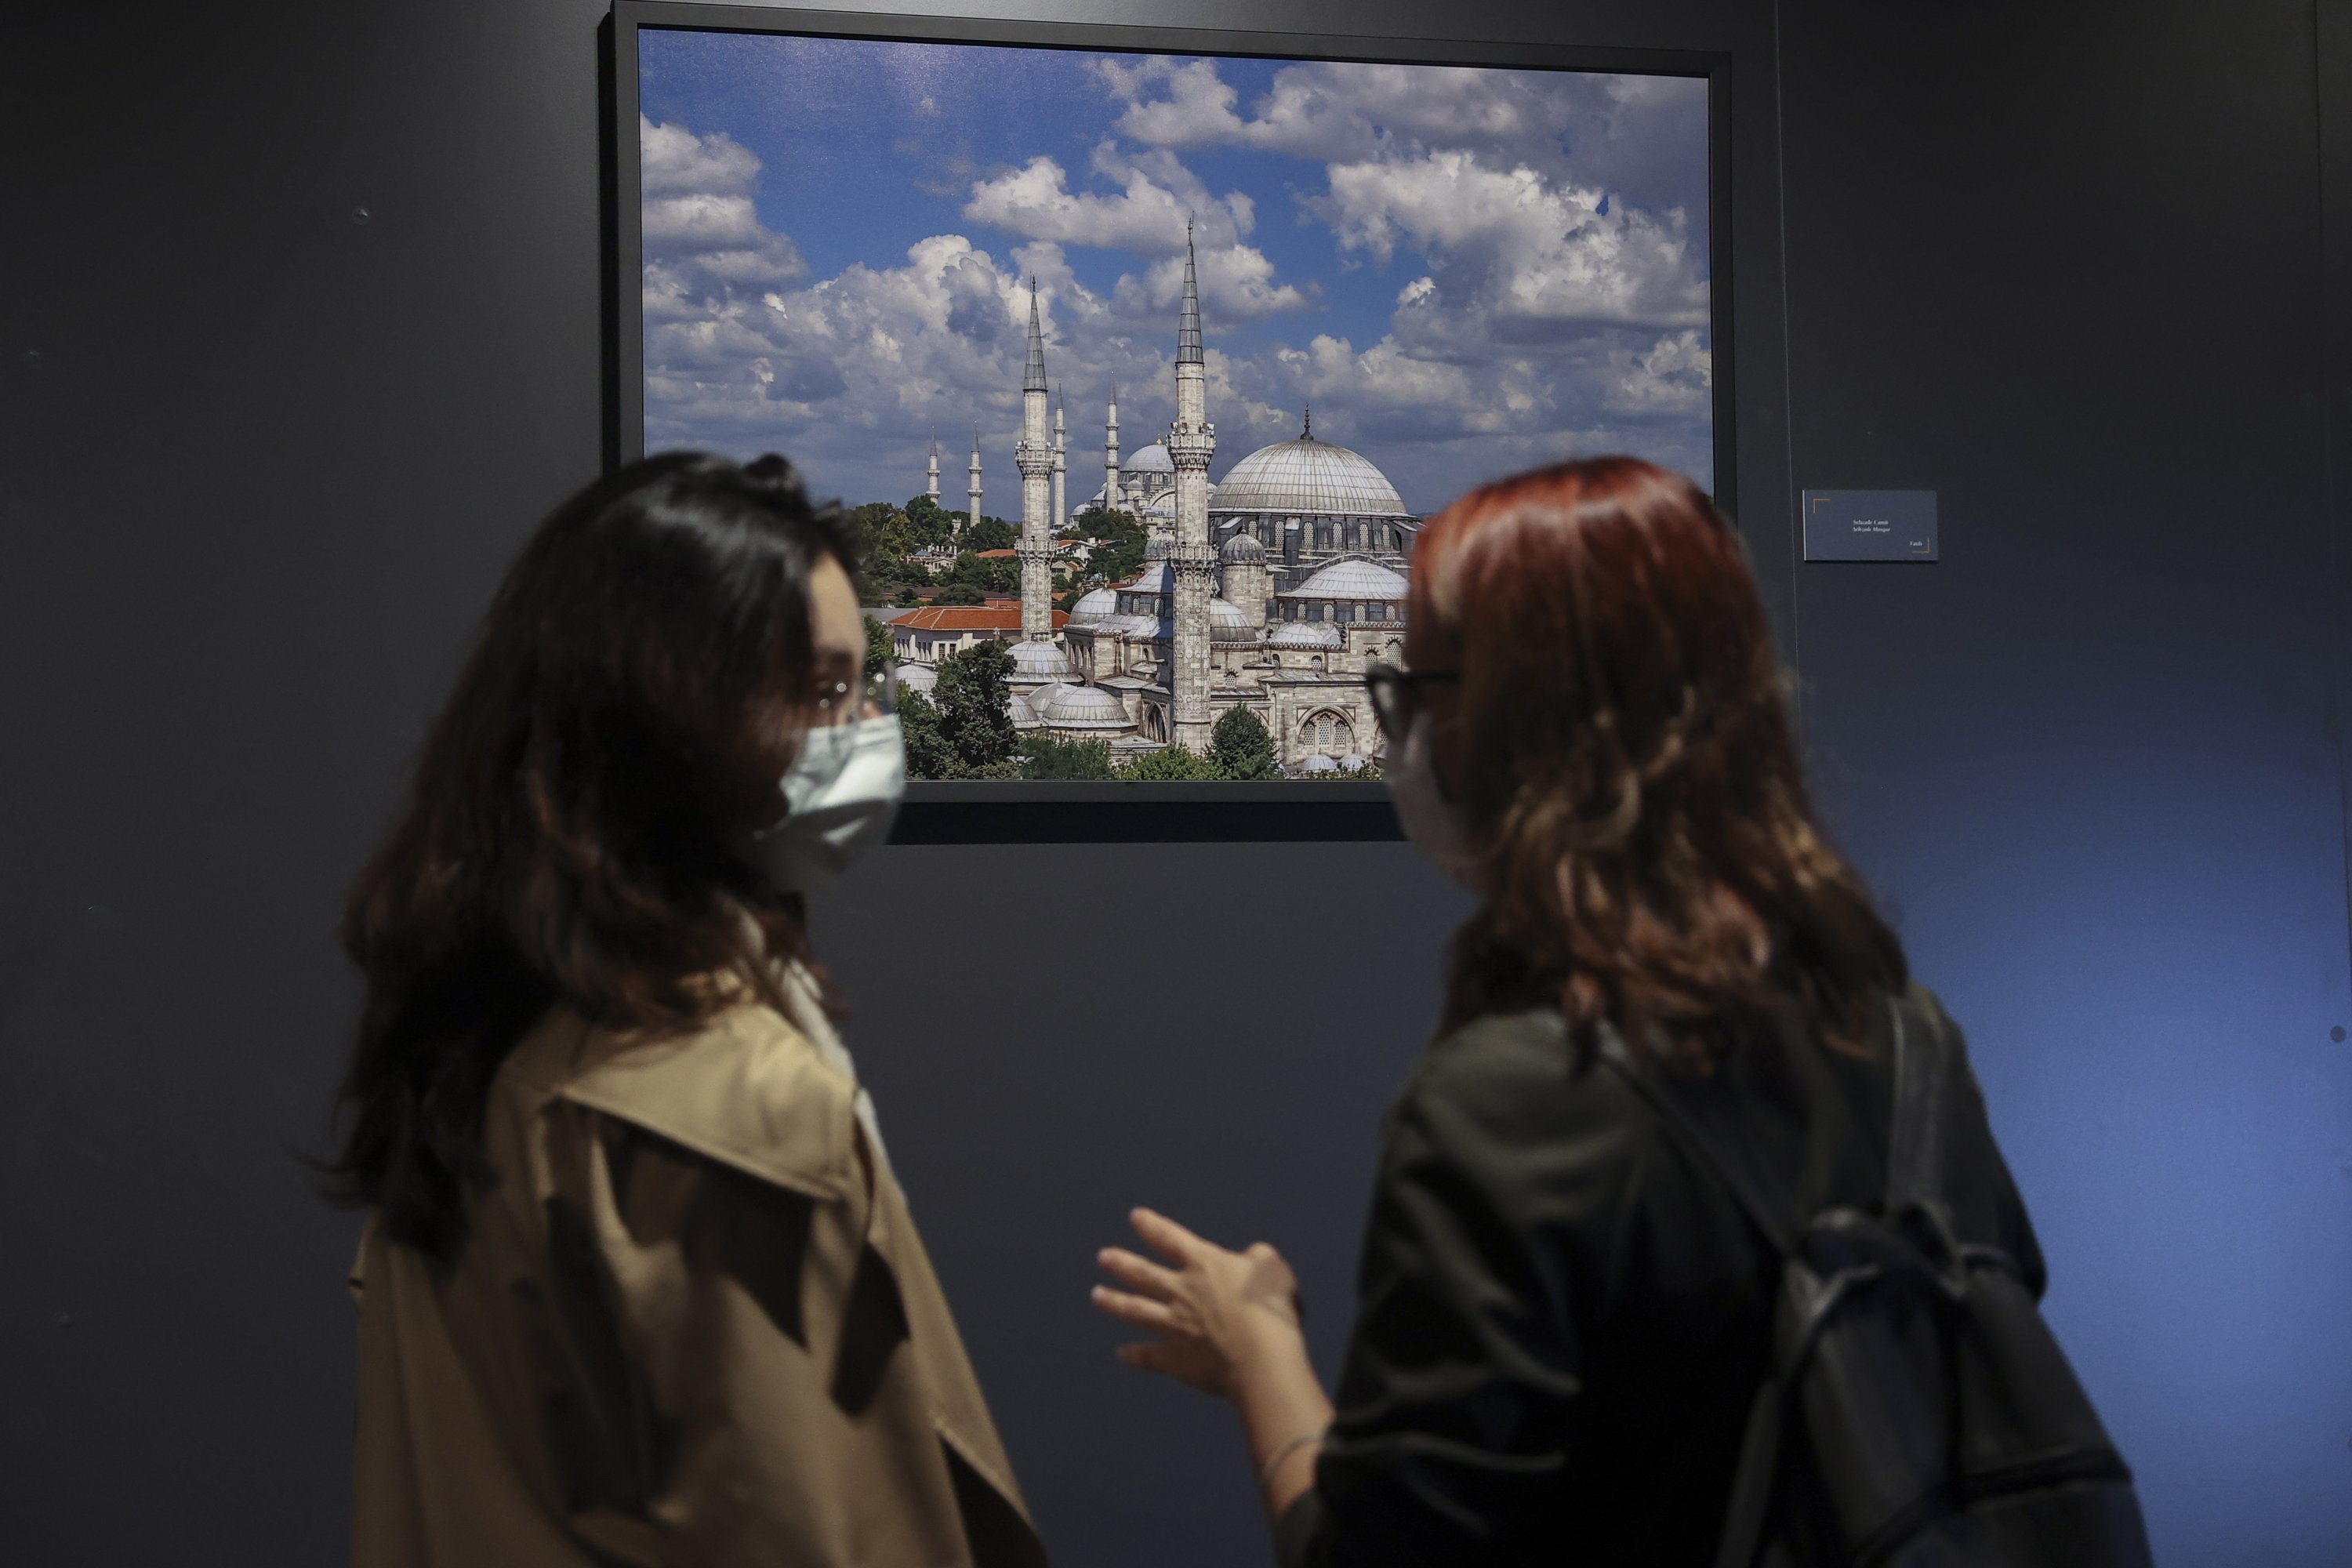 Two visitors examine a photo by Izzet Keribar in the exhibition “Heritage: Ottoman Architecture and Tile Art in Istanbul,” Museum of Turkish and Islamic Arts, Istanbul, Turkey, Oct. 2, 2021. (AA Photo)